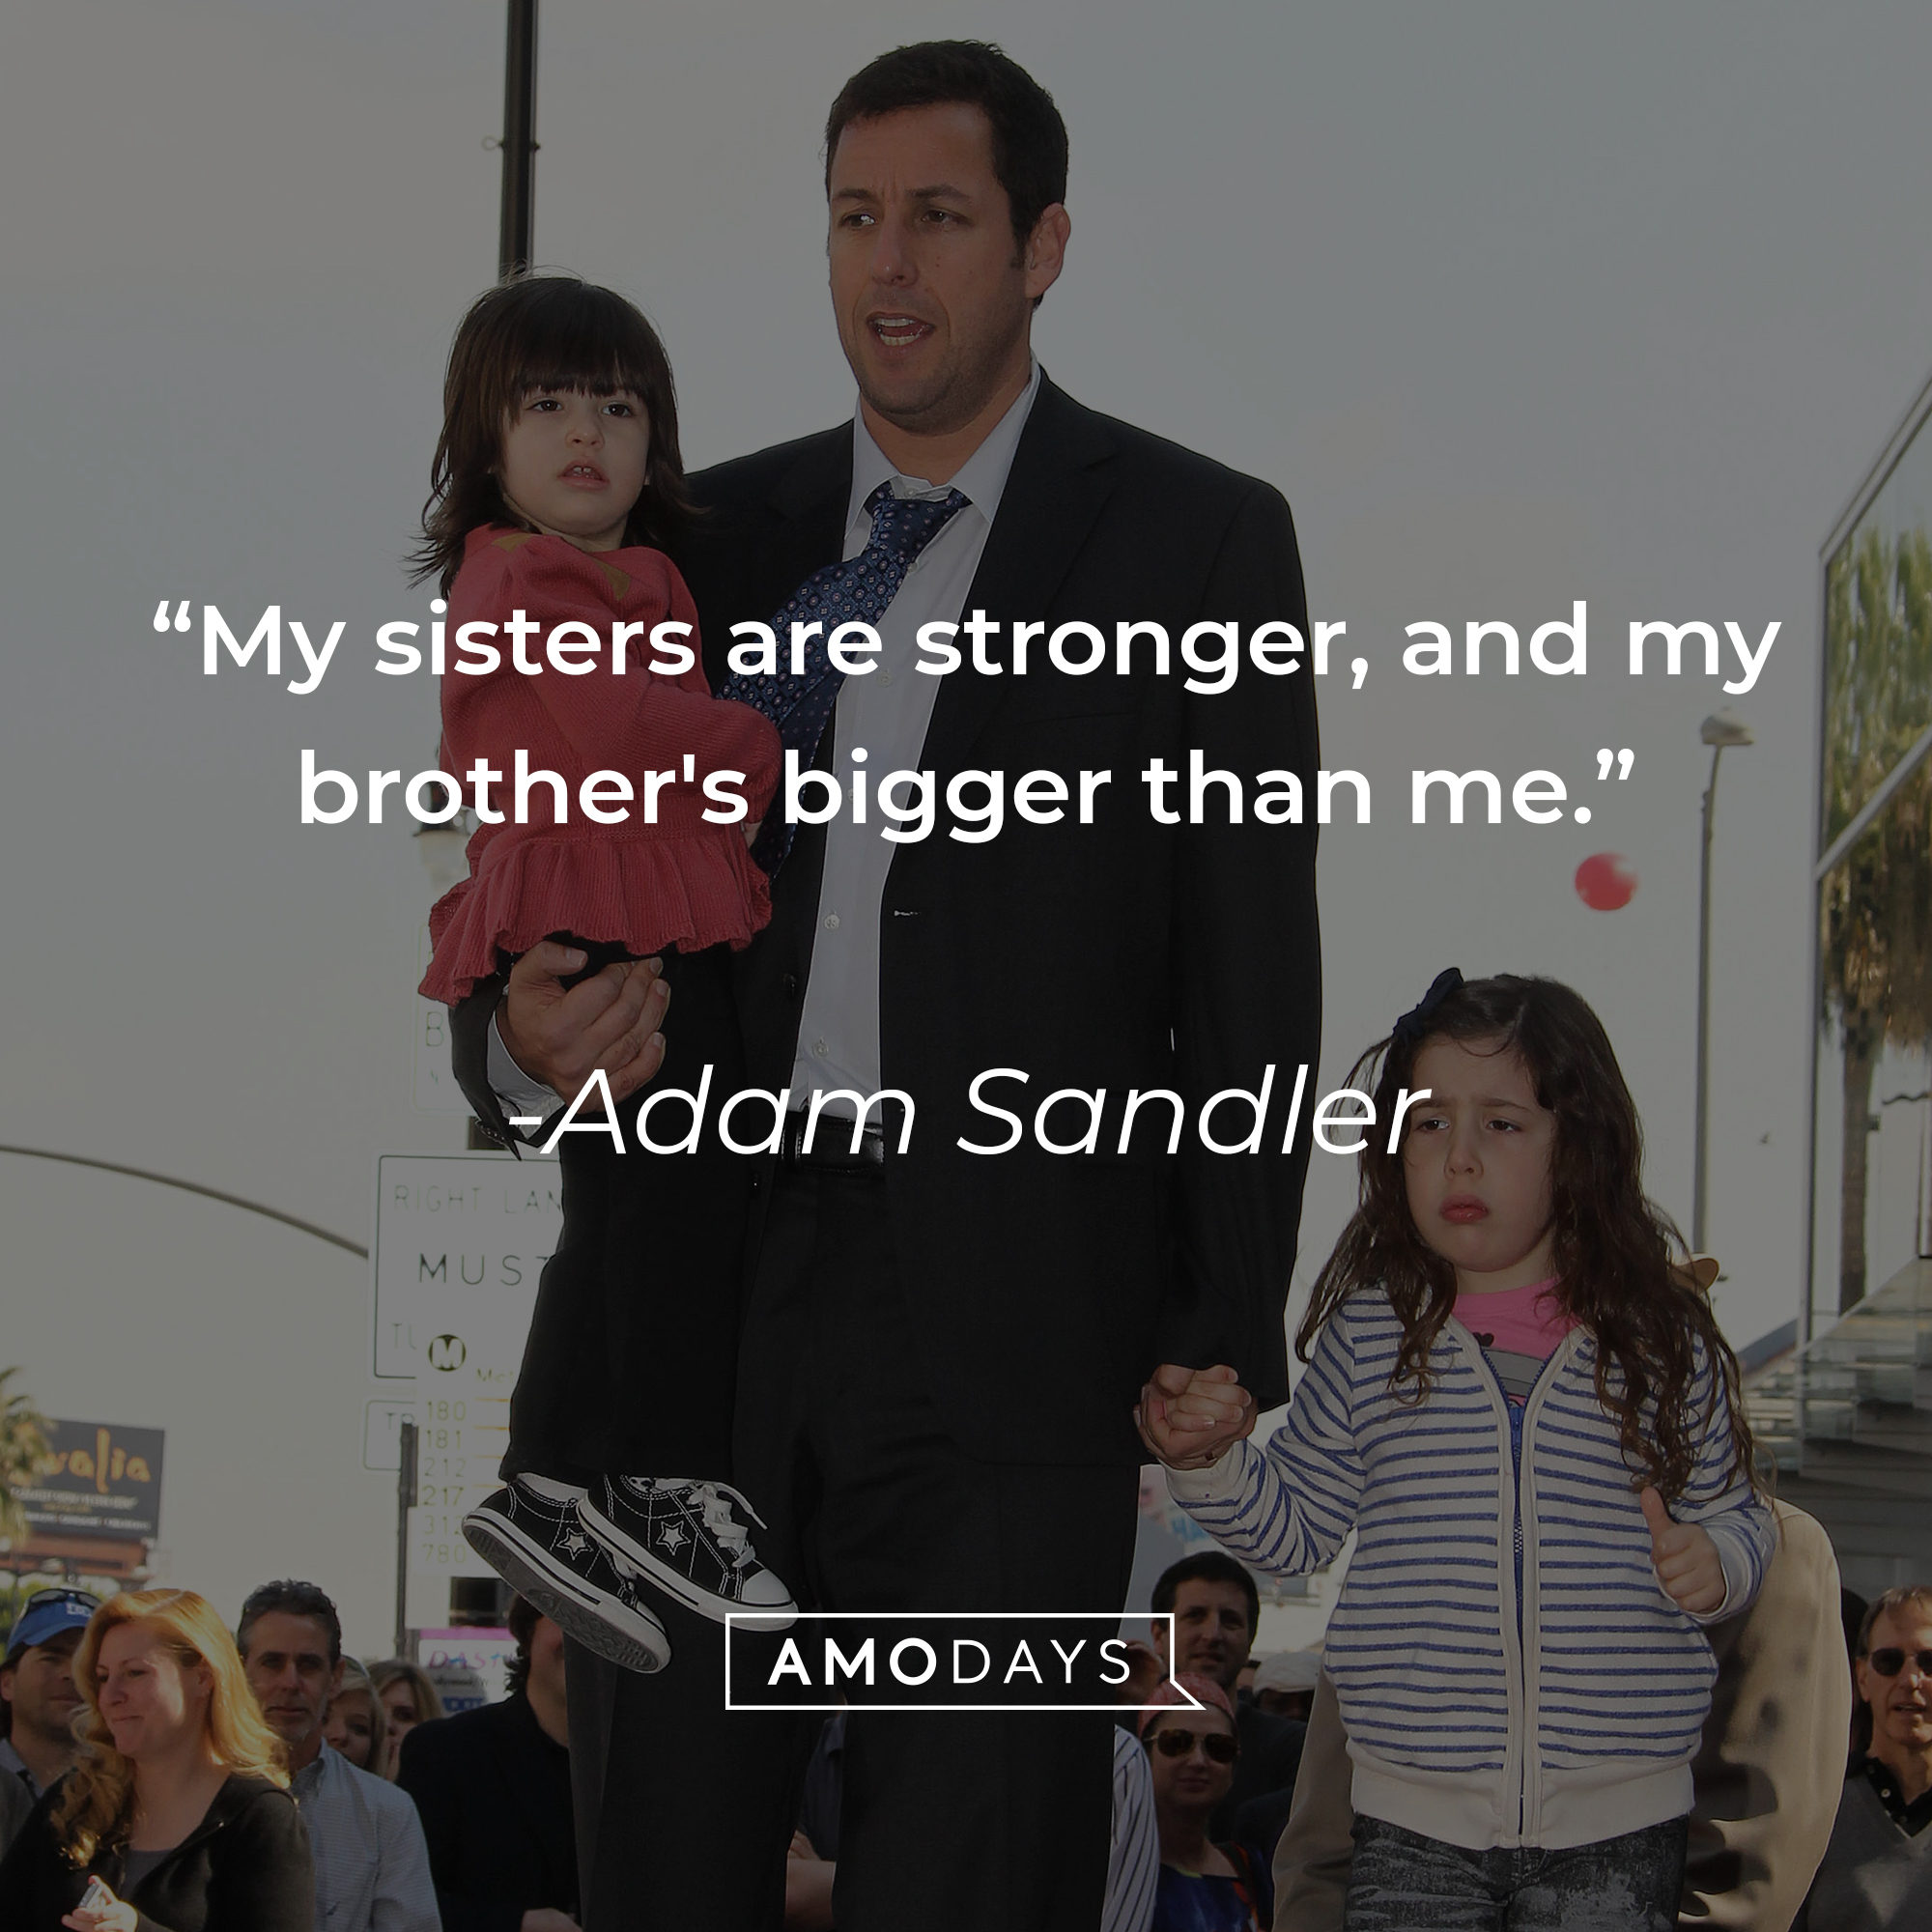 Adam Sandler's quote: “My sisters are stronger, and my brother's bigger than me.” | Source: Getty Images